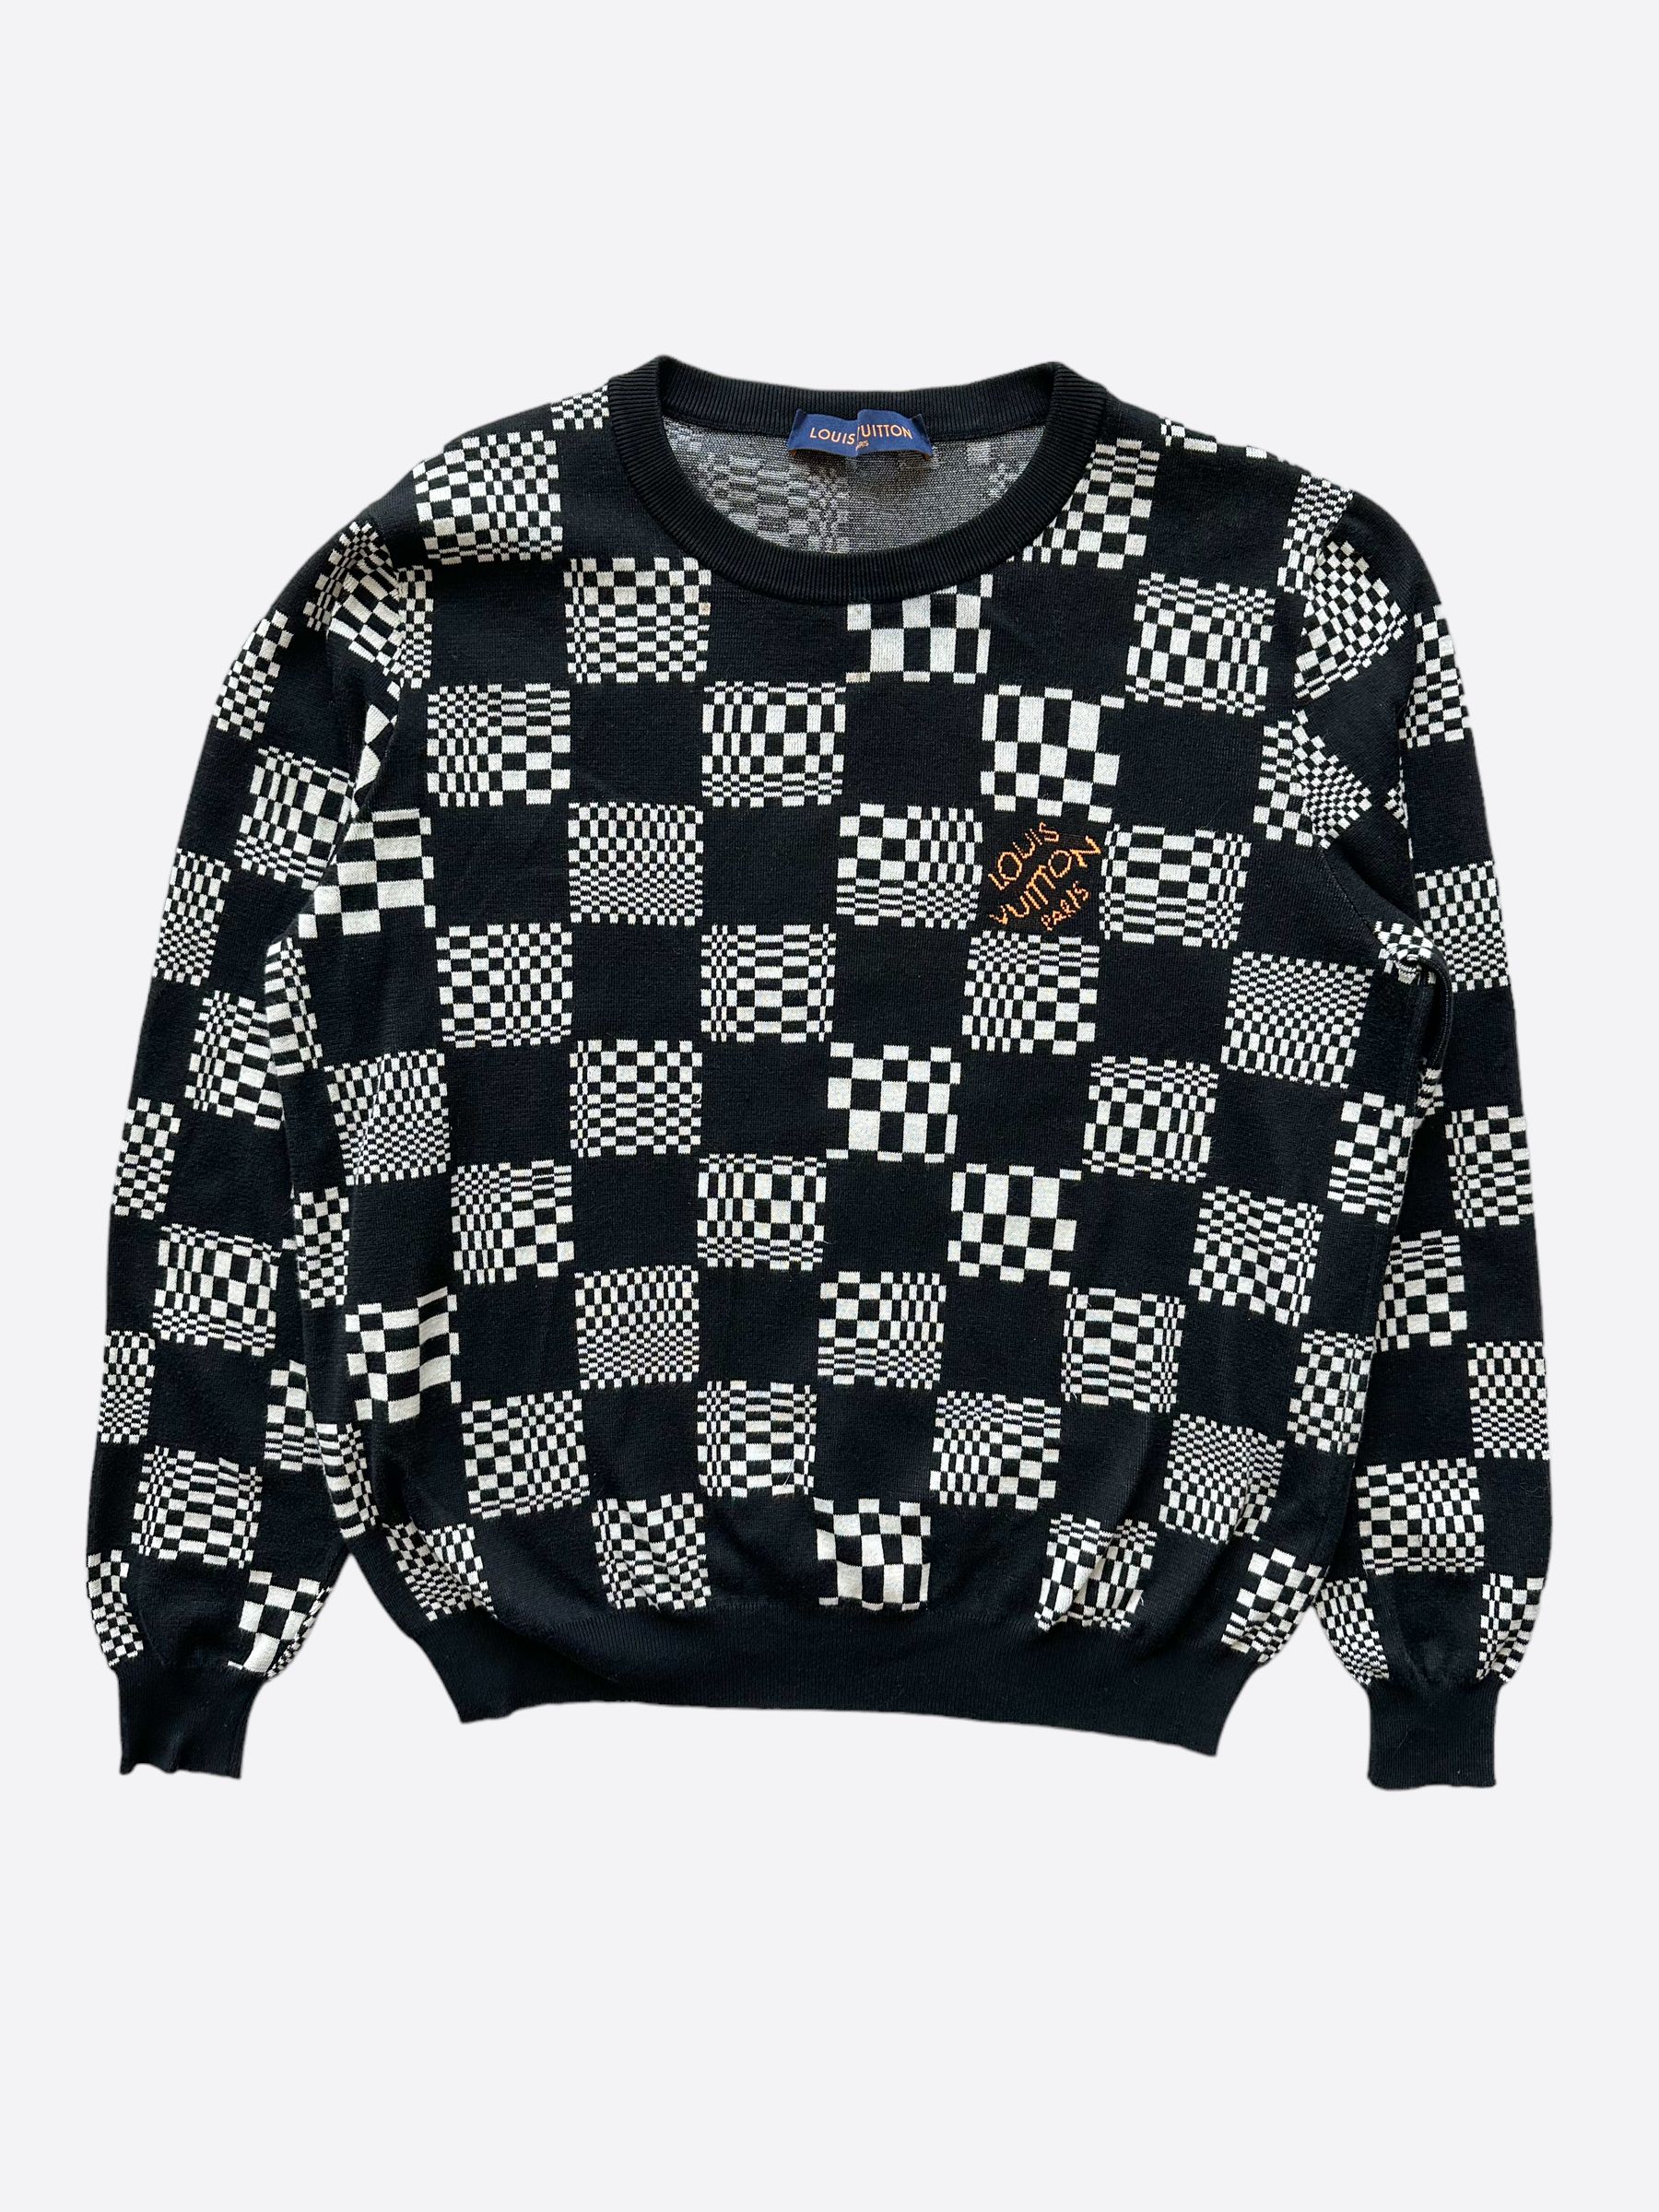 Louis Vuitton Virgil Abloh Black And White Damier Distorted Coated